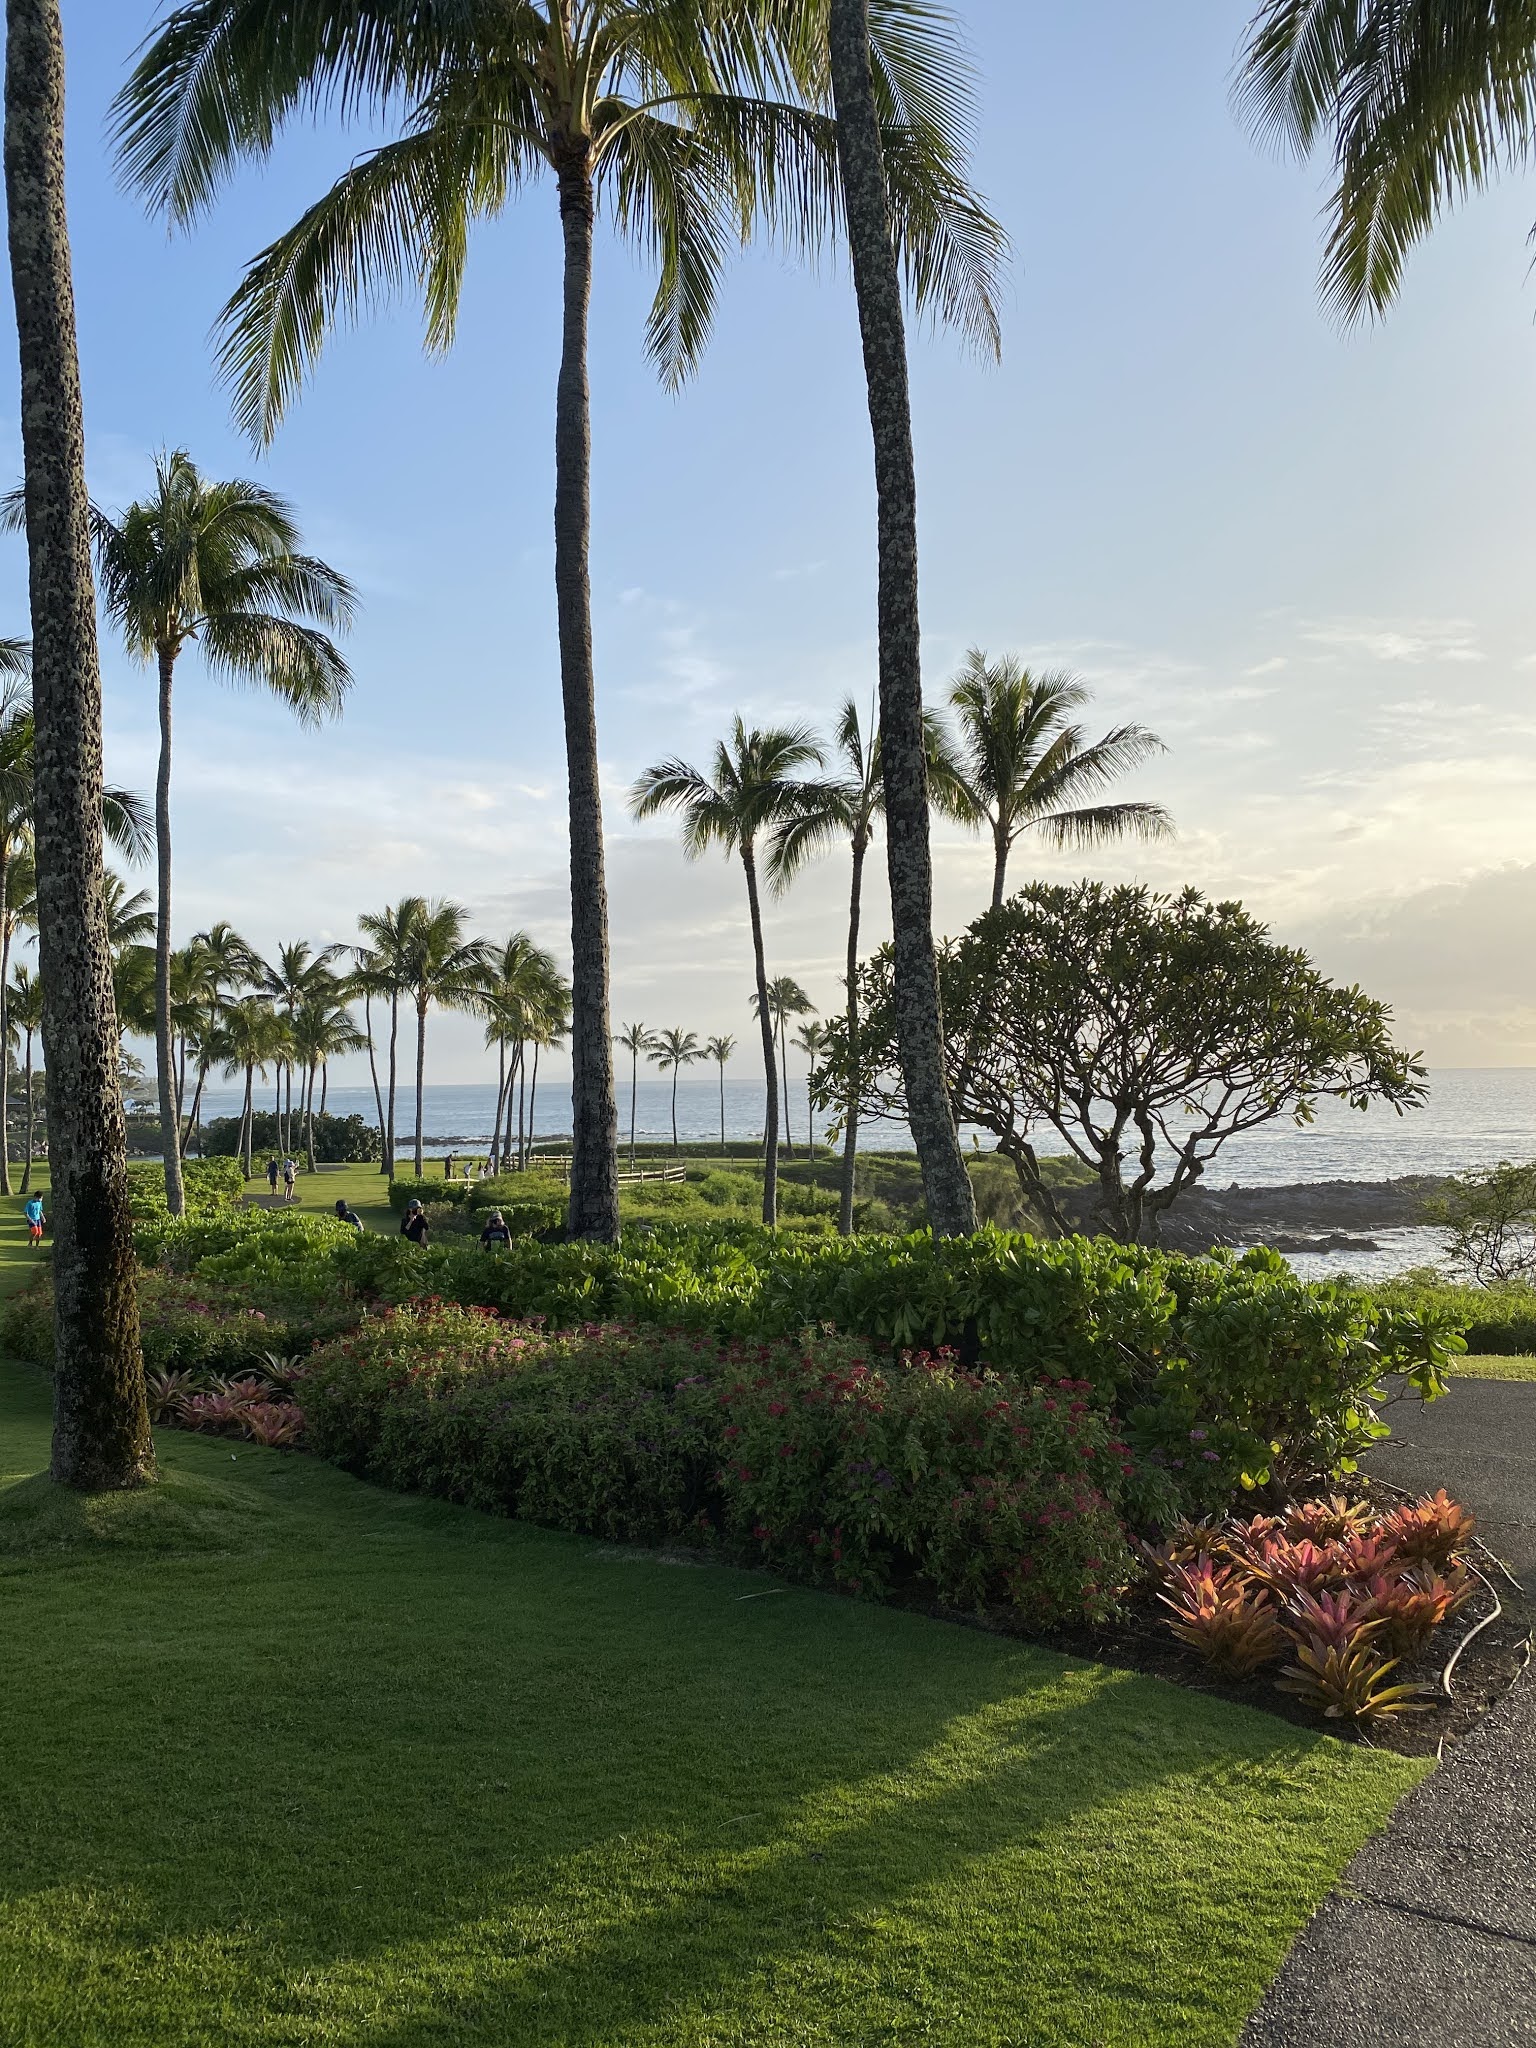 The Ultimate Travel Guide for Maui, Hawaii | Traveling to Hawaii During the Pandemic | Maui Hawaii Hikes | Best Hotels in Maui | Best Hikes in Maui | Where to Eat in Maui | Hawaii Travel Guide